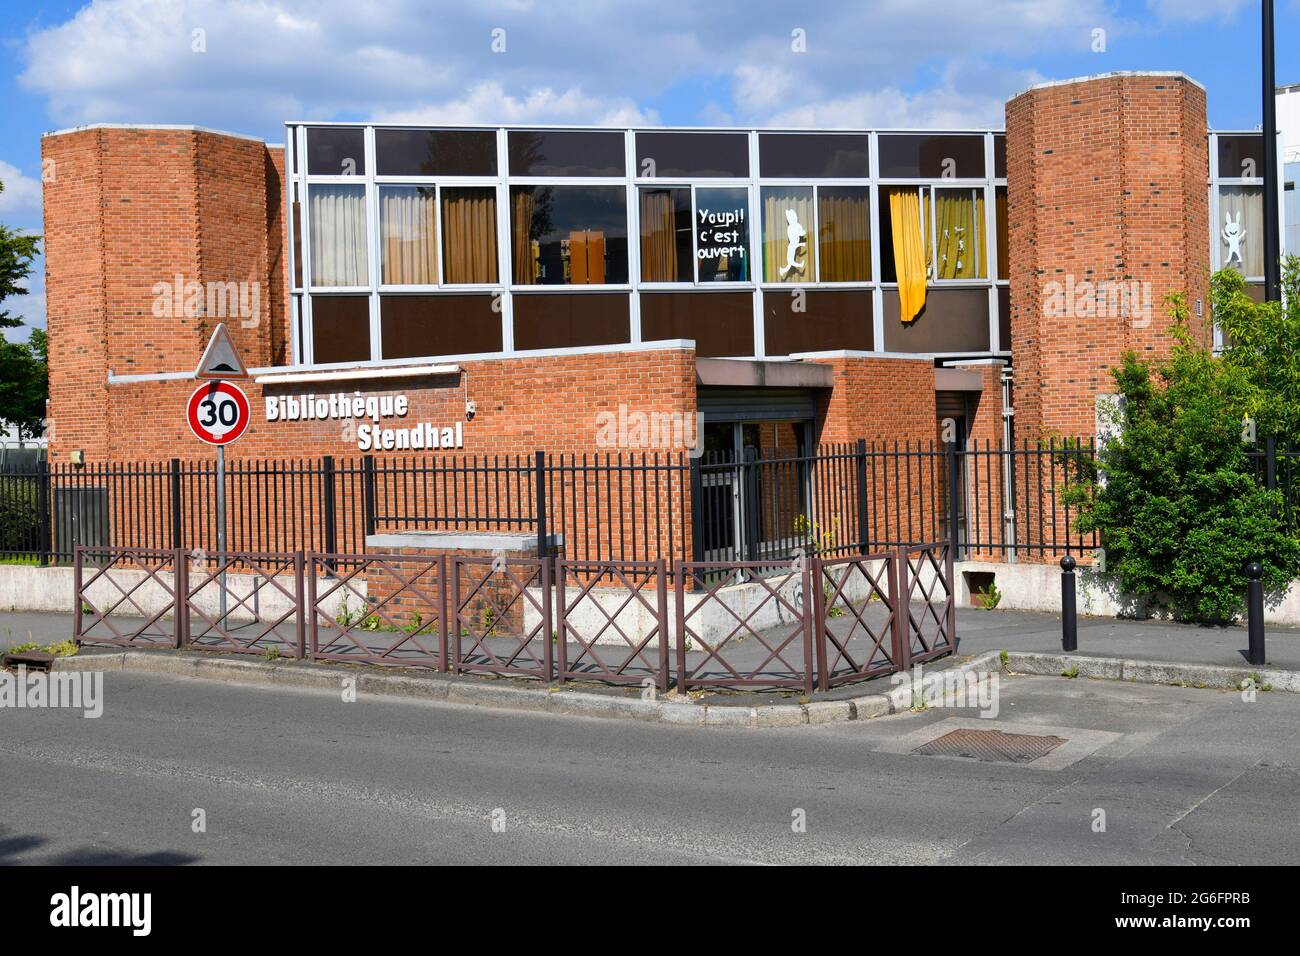 Stendhal Public Library in Sartrouville, Yvelines, France. Stock Photo